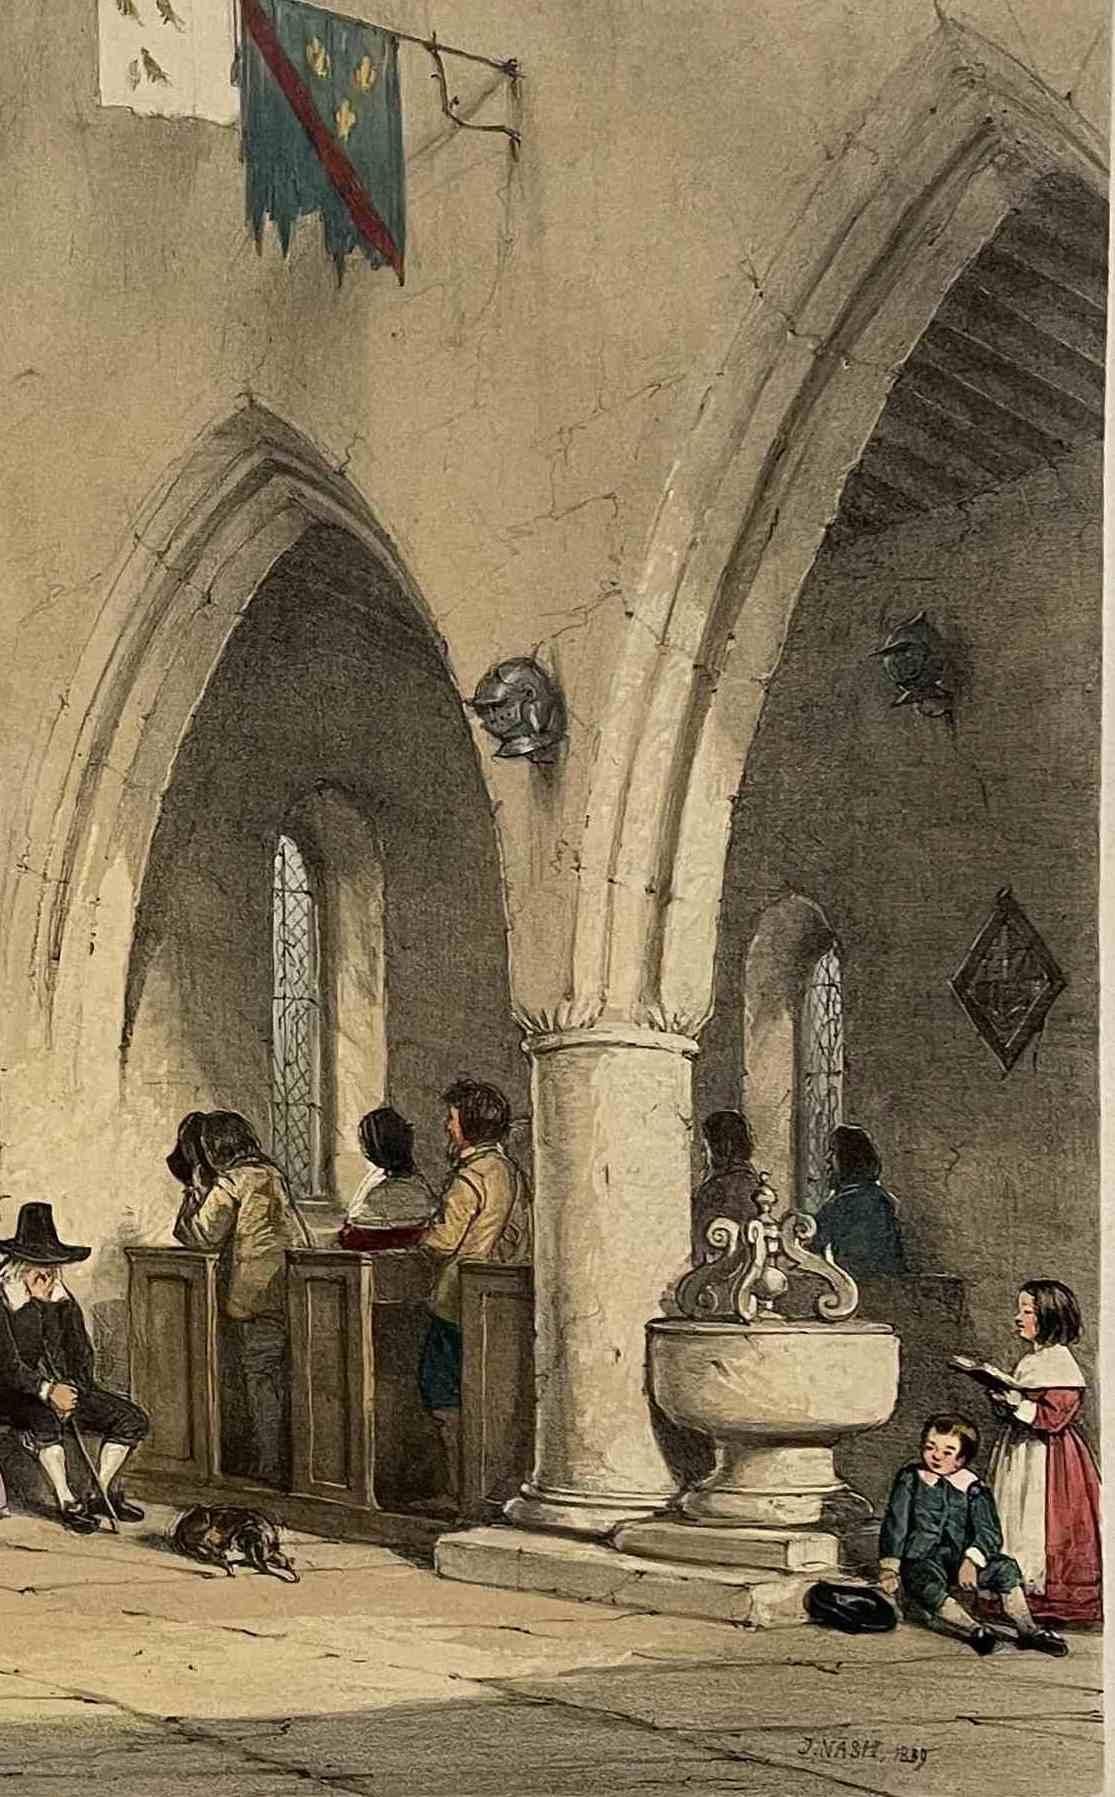 A hand-colored lithograph on paper by Joseph Nash of Chapel, Haddon Hall, Derbyshire, plate 25 in the disbound book “The Mansions of England in the Olden Time”, first series.  Printed by Charles Joseph Hullmandel (Pub. London: T. M'Lean, 1839). 